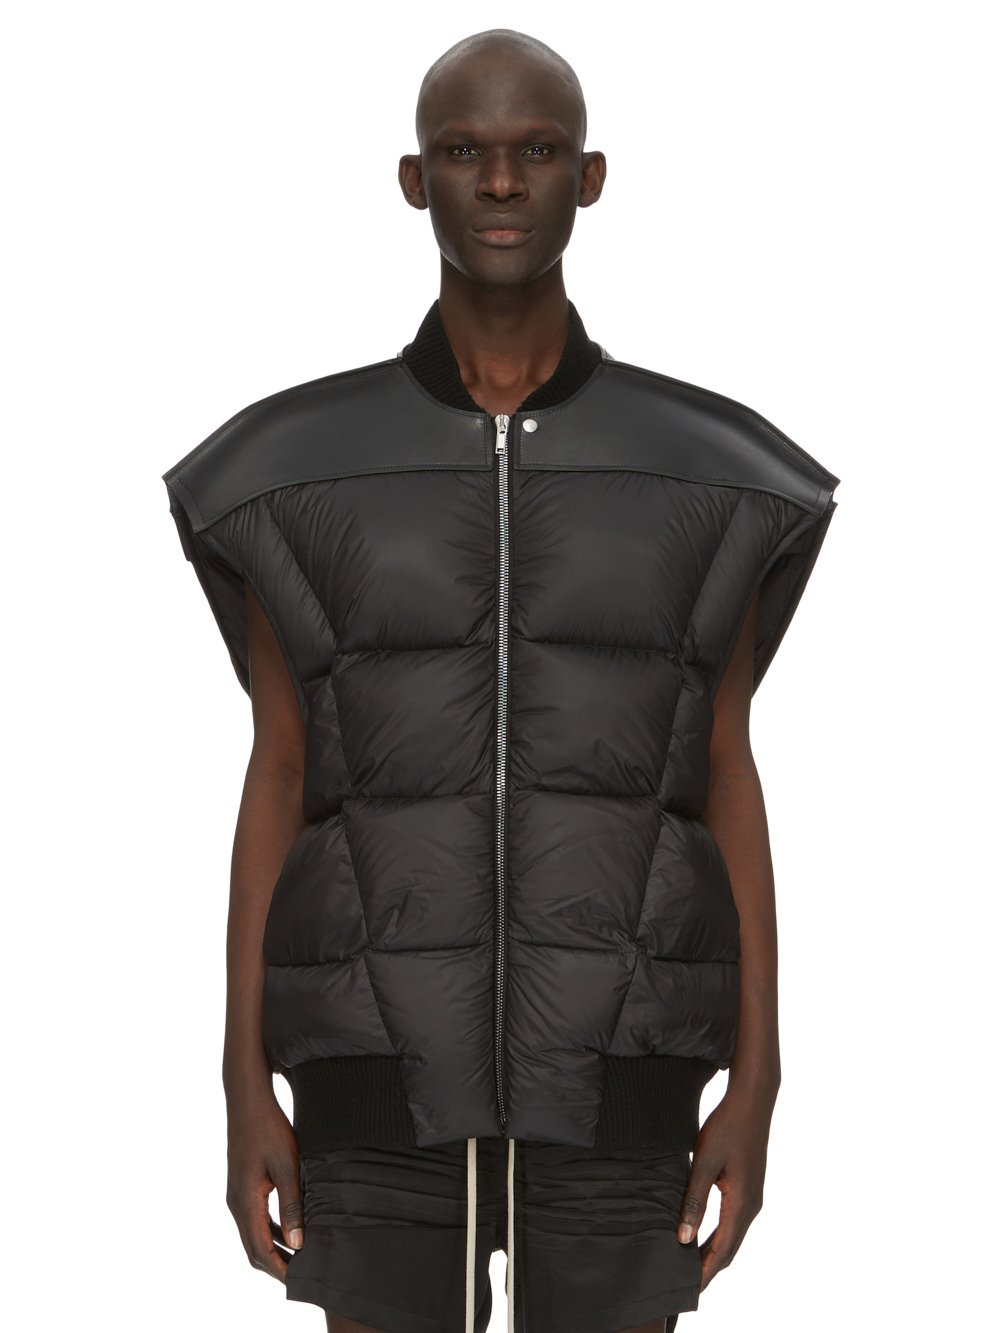 RICK OWENS FW23 LUXOR RUNWAY JUMBO FLIGHT VEST IN BLACK GROPPONE COW LEATHER AND RECYCLED NYLON